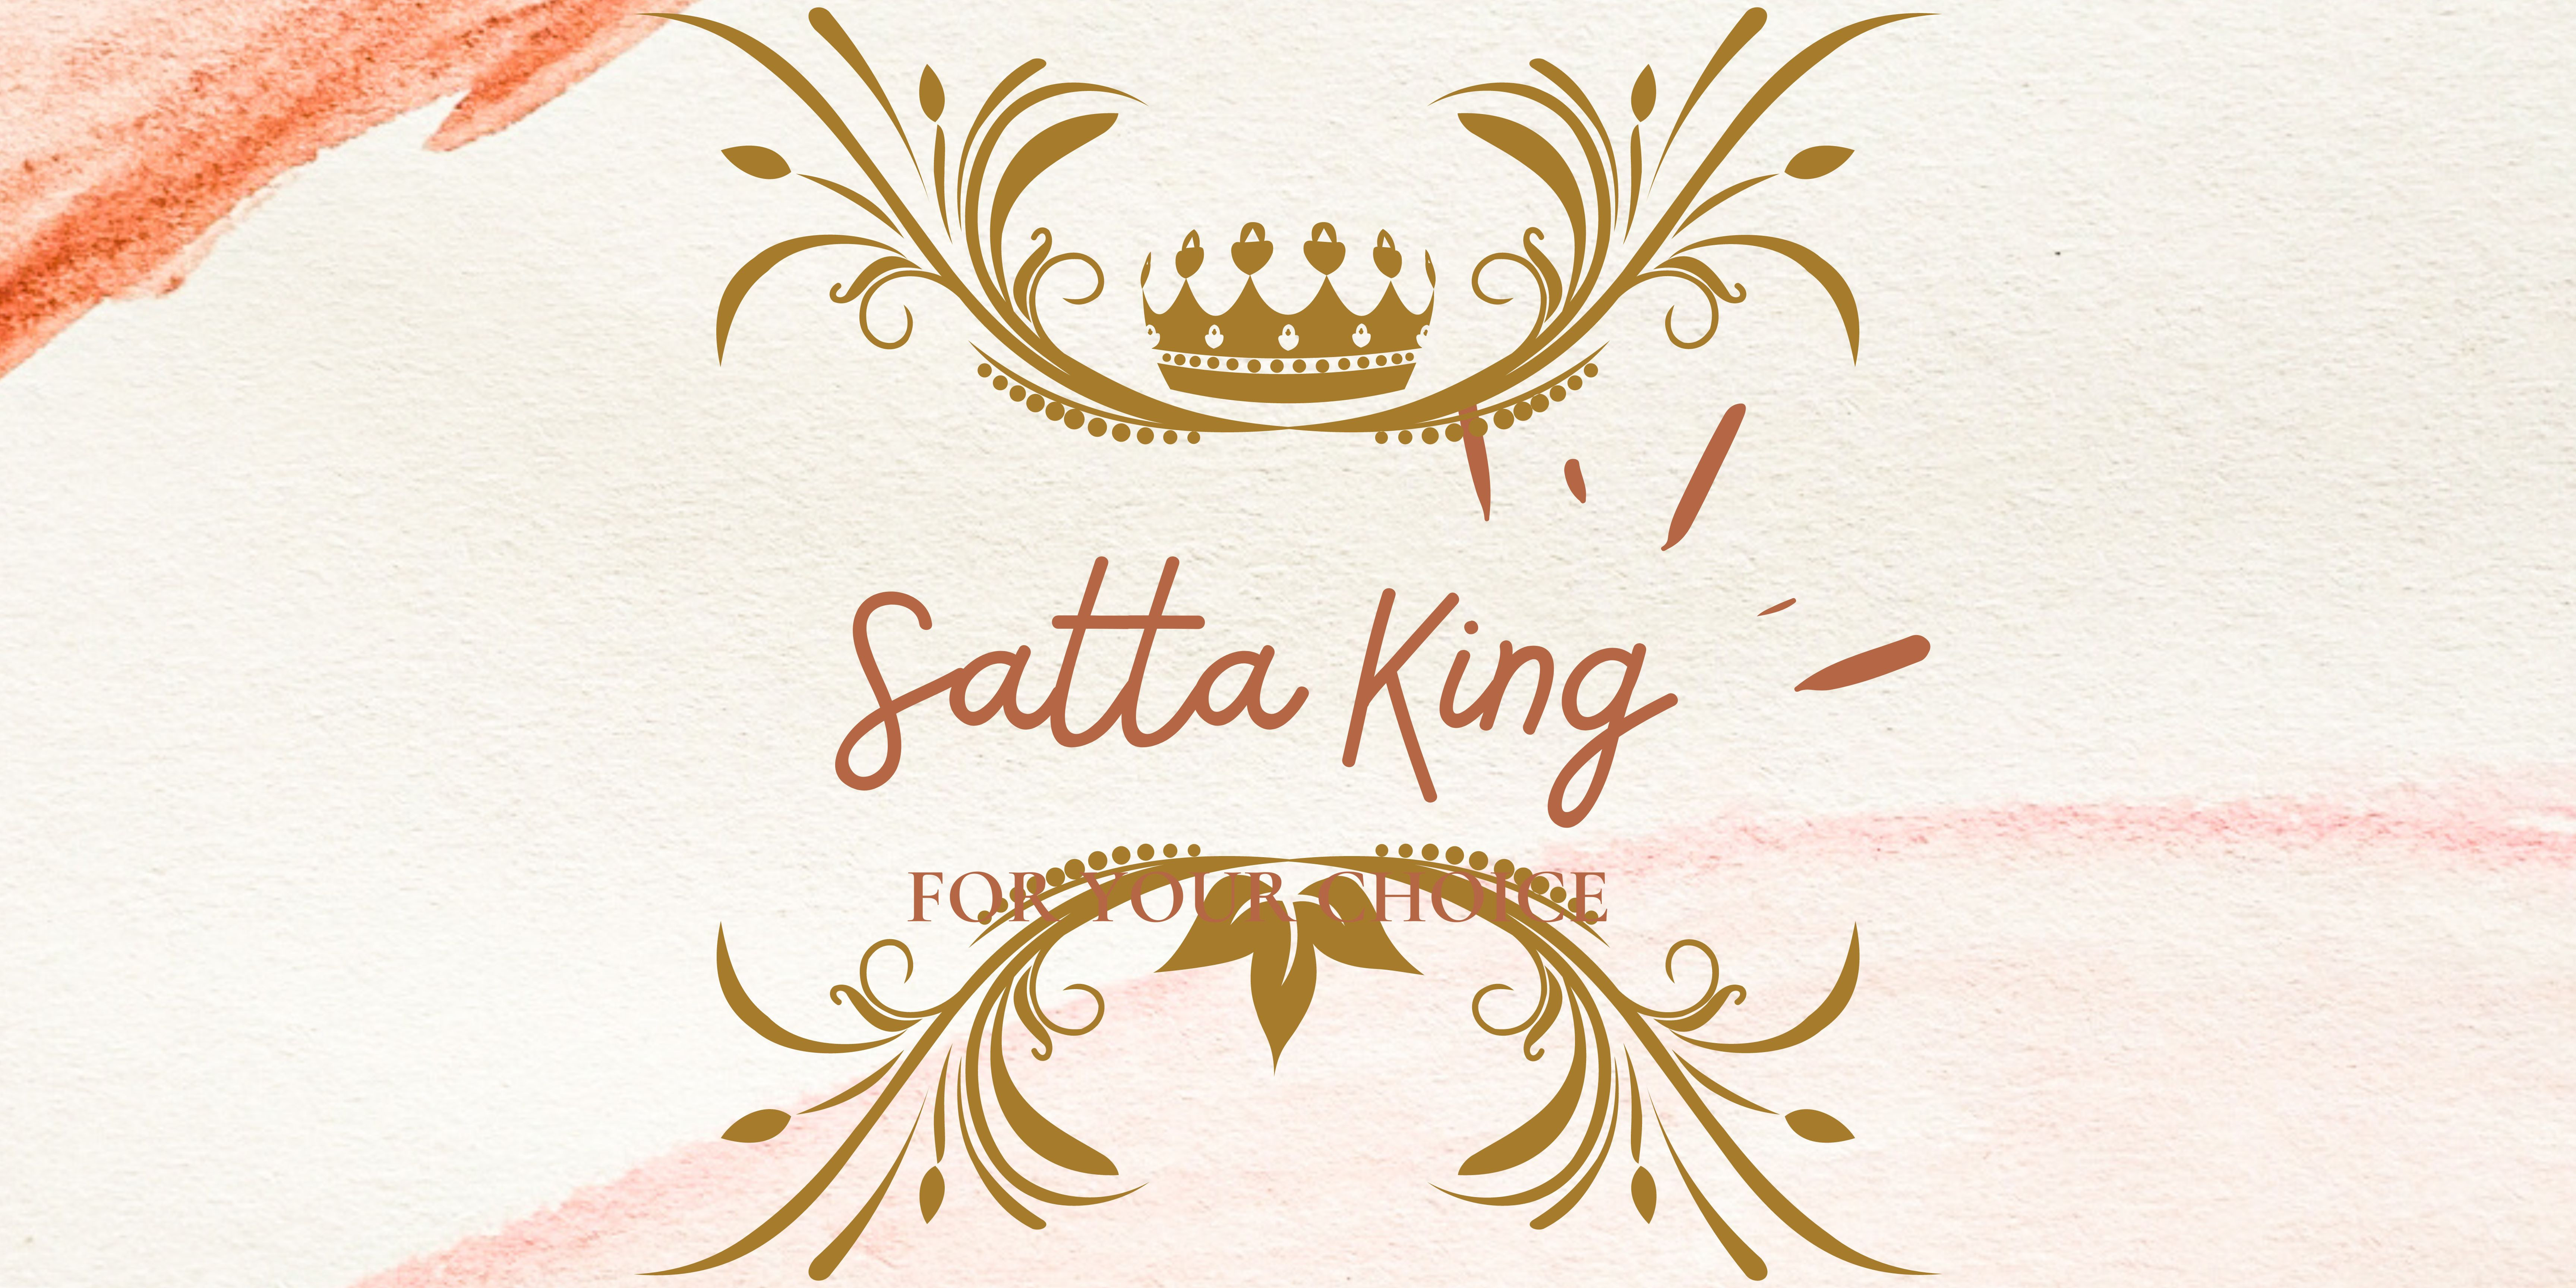 The Evolution of Satta King: From Ankada Jugar to Modern-Day Popularity